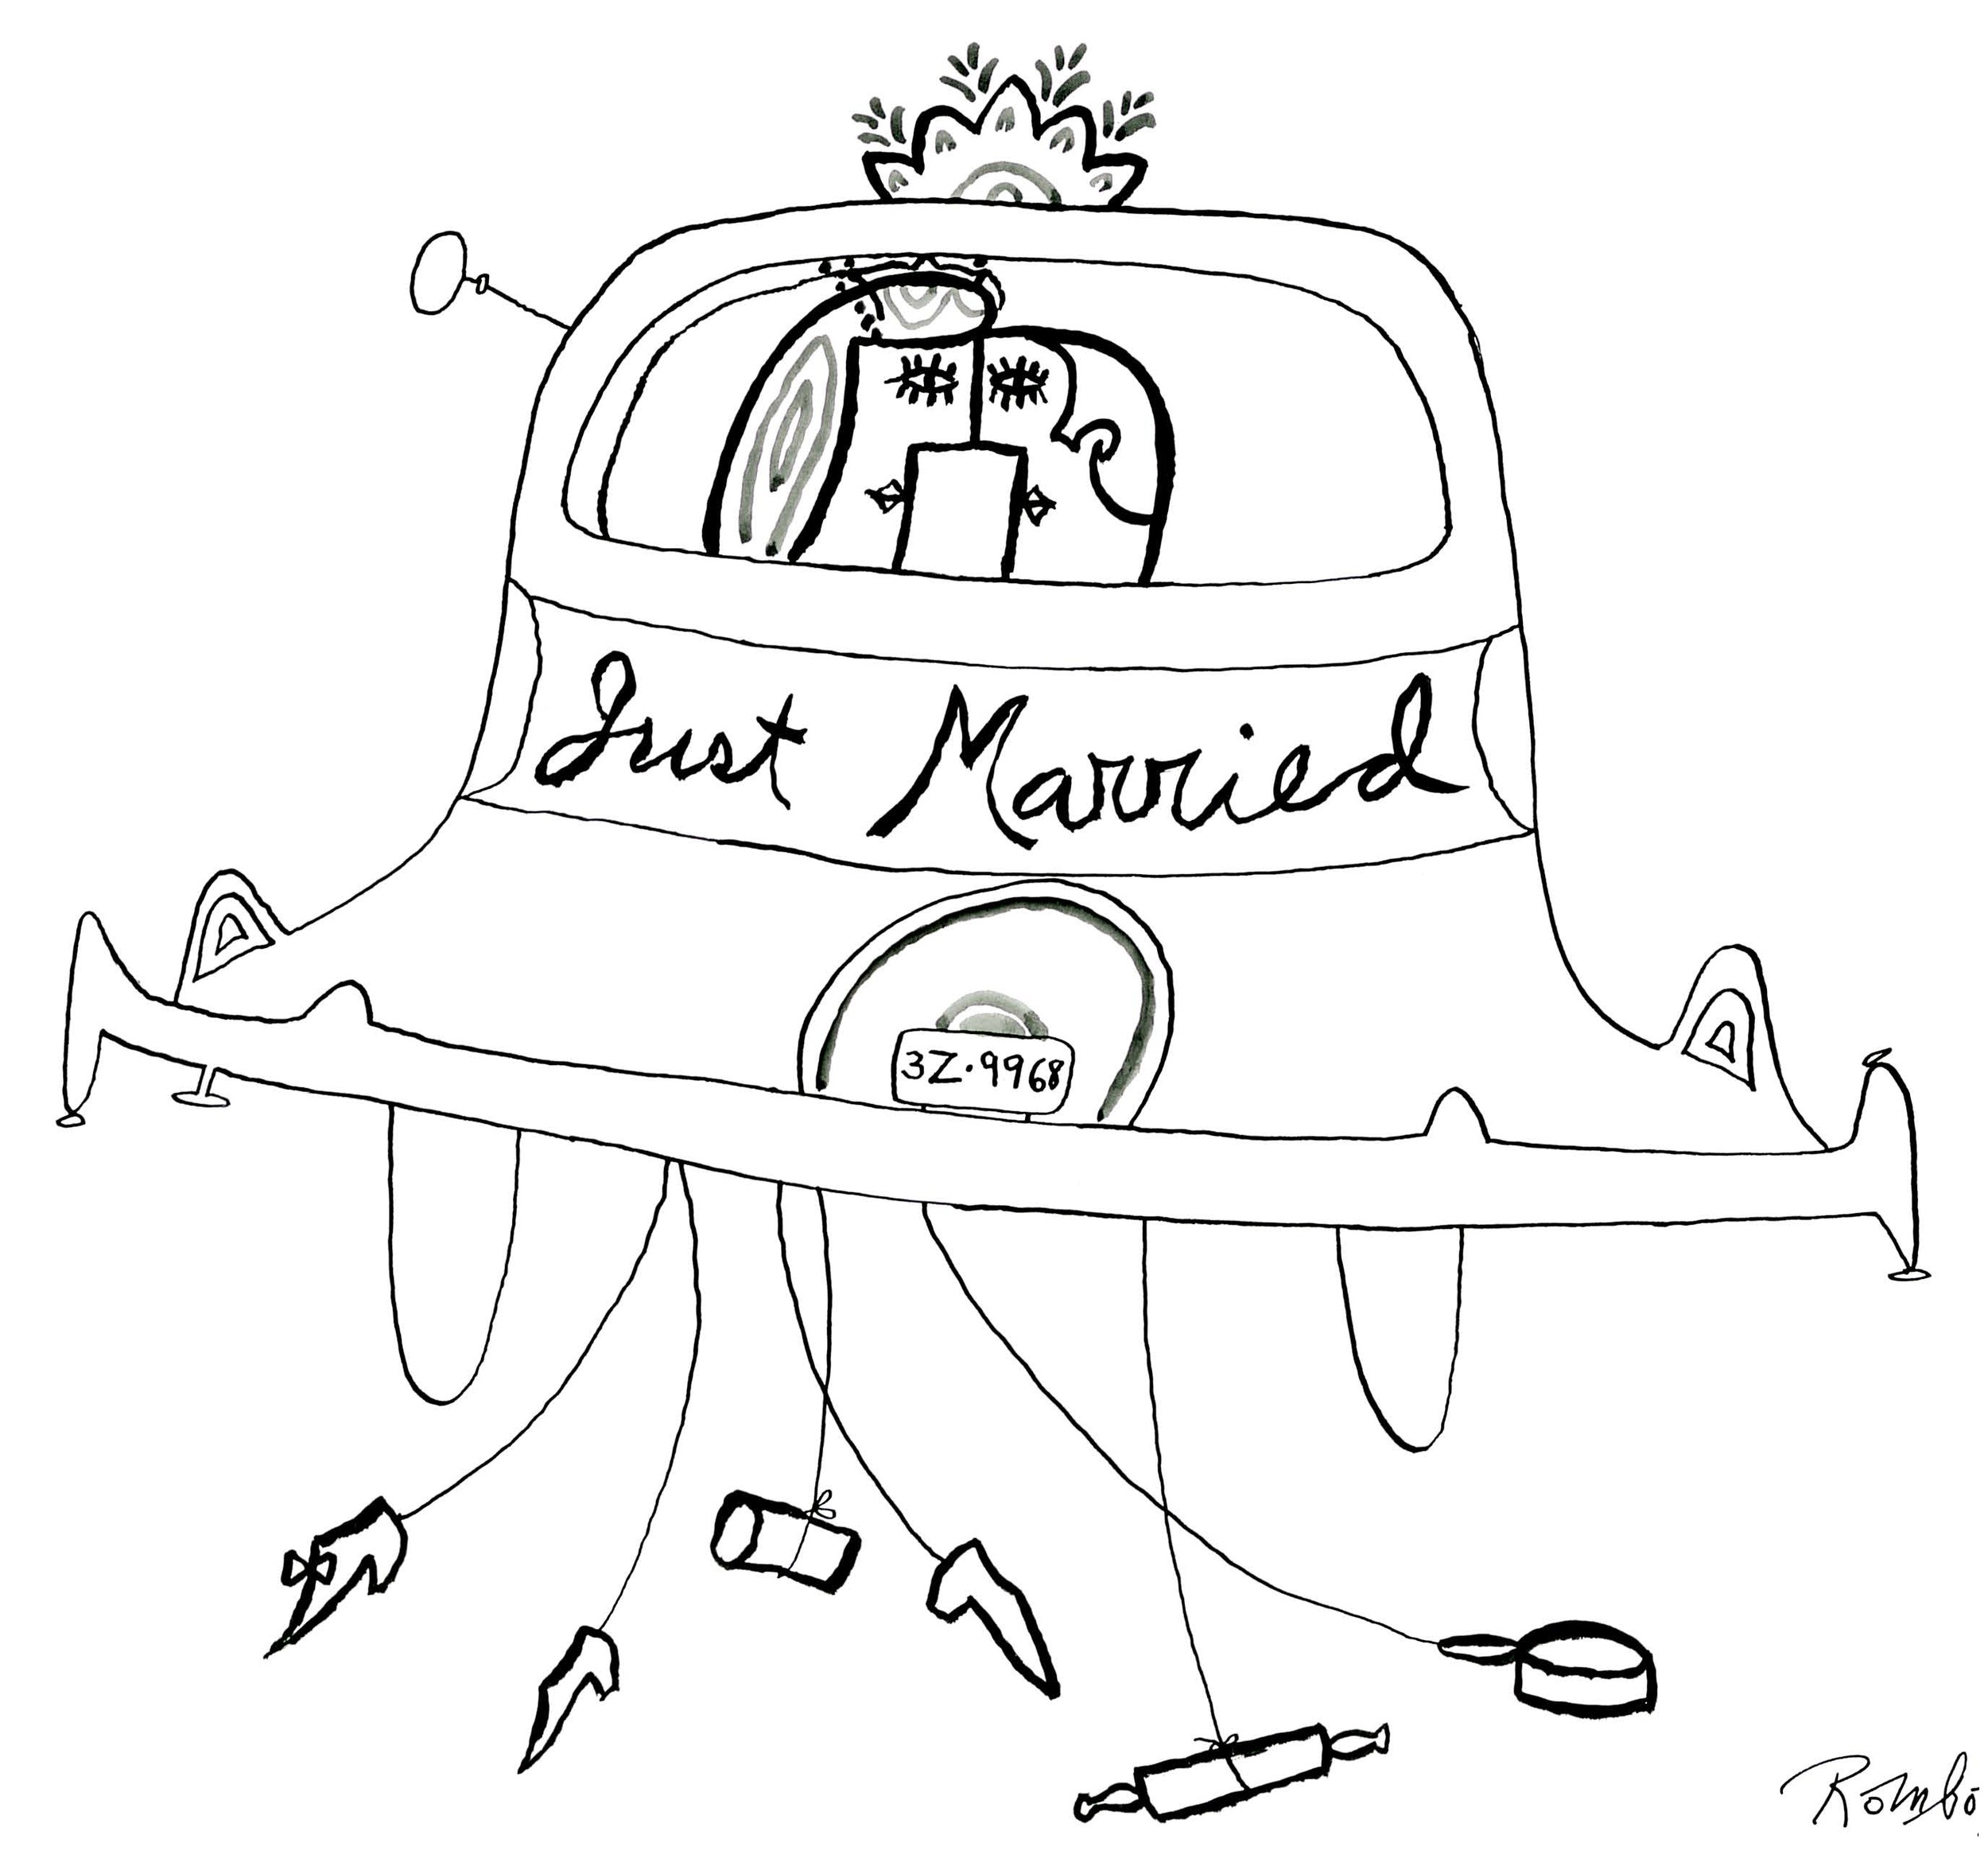   Just Married    Ink on paper 1964   